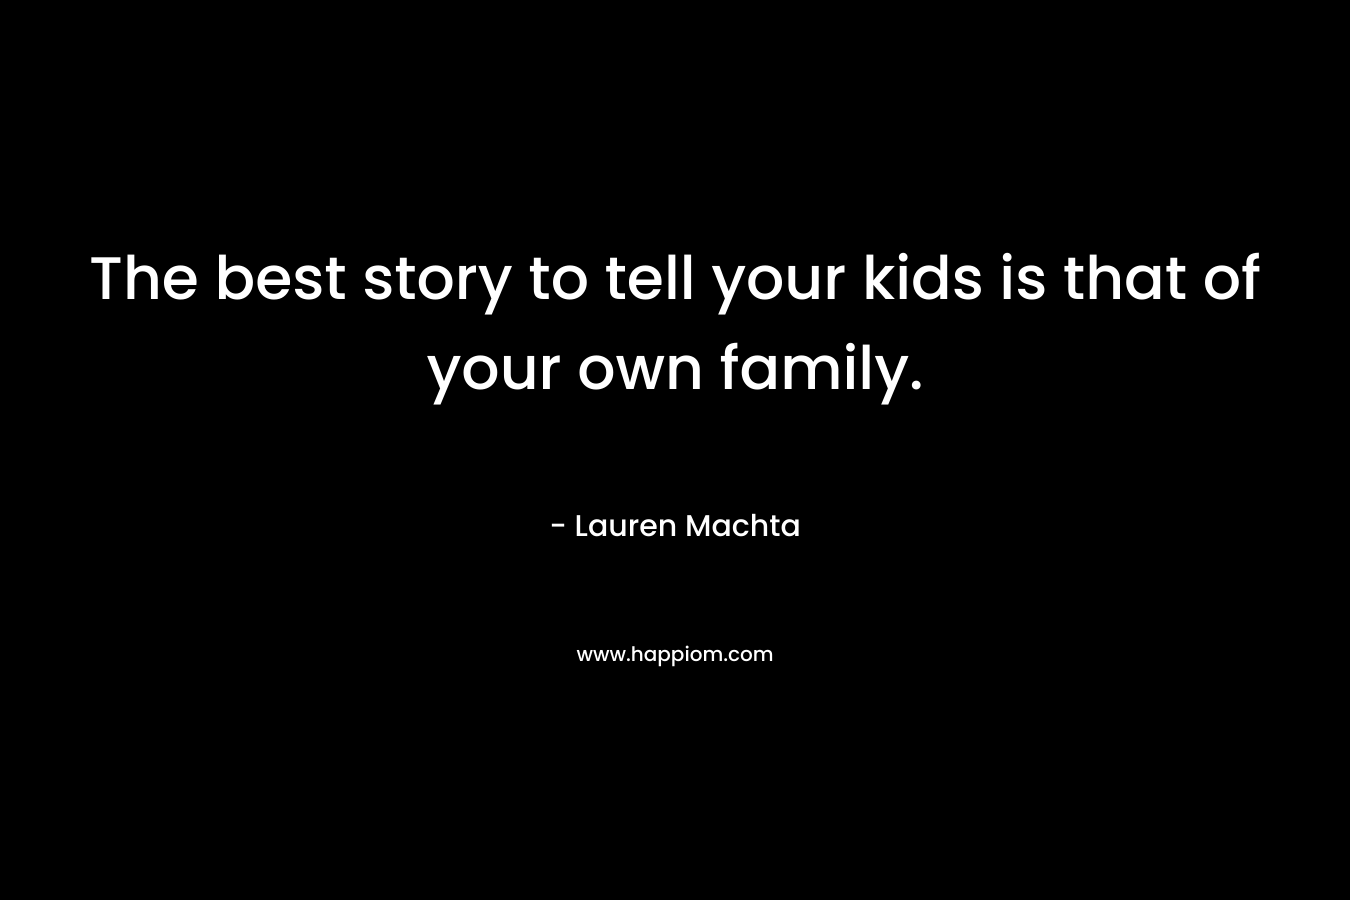 The best story to tell your kids is that of your own family.